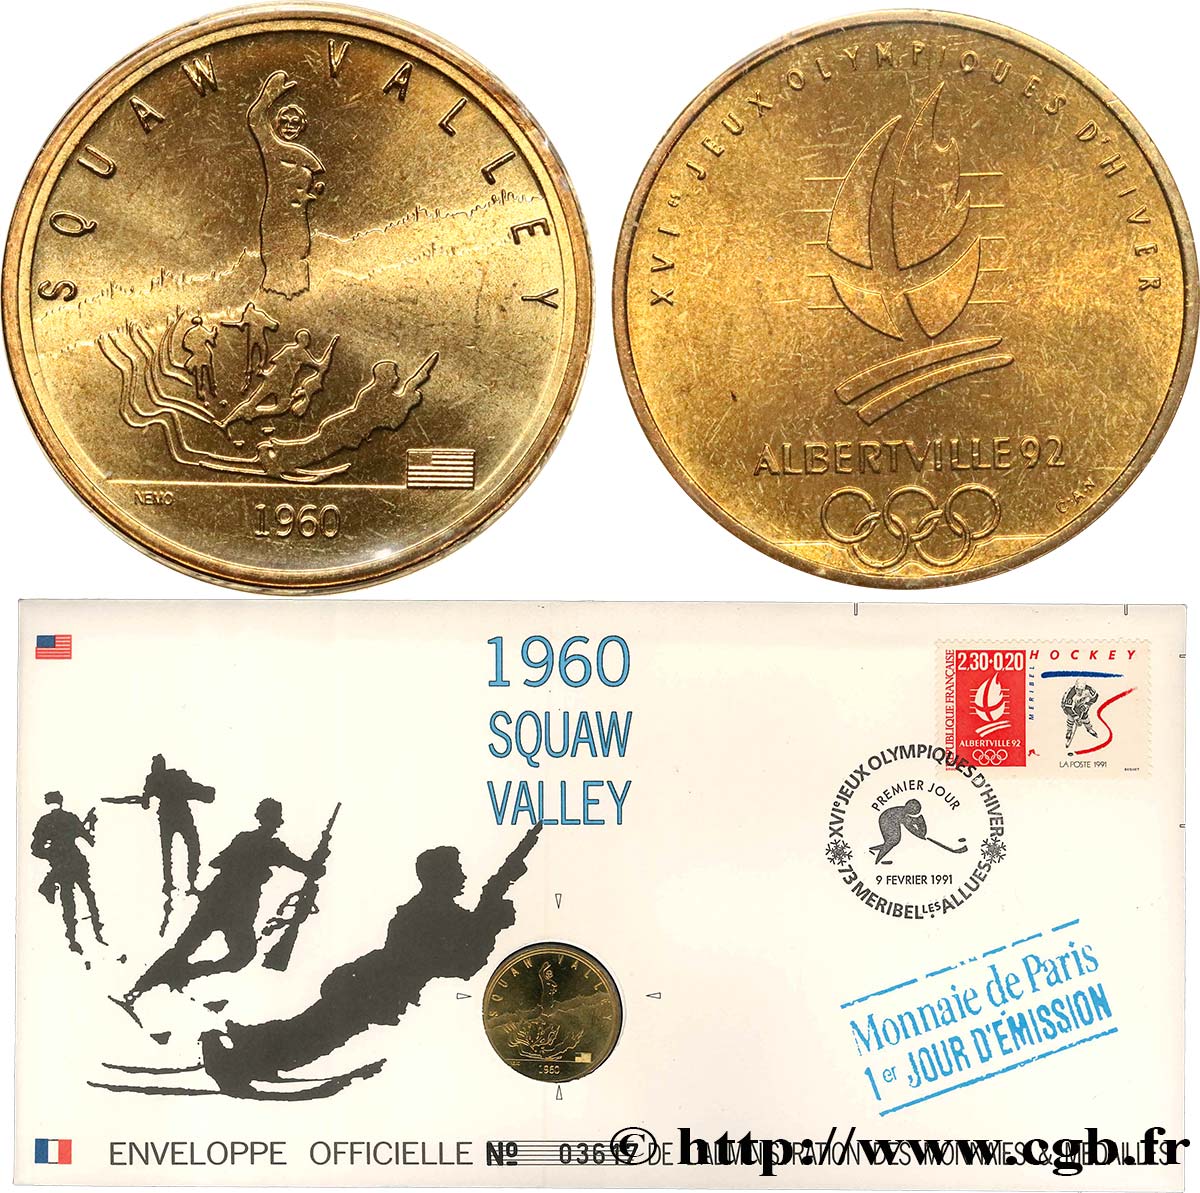 SPORTS Enveloppe “Timbre médaille” n°11 MS